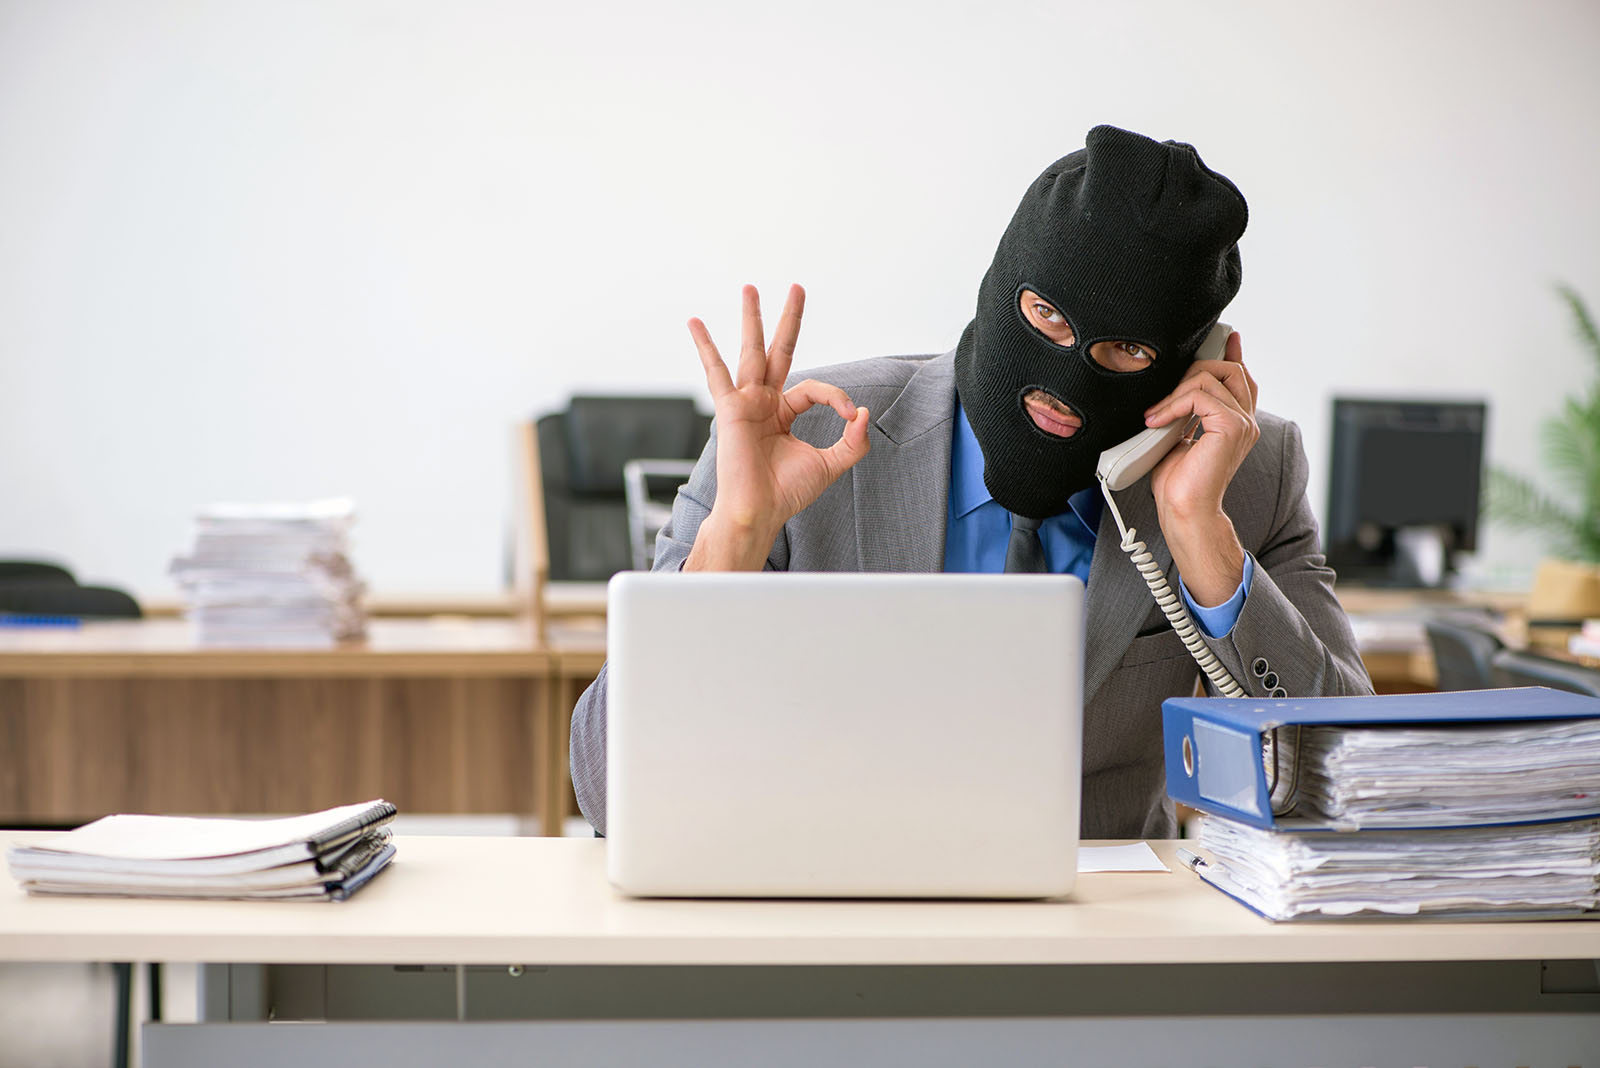 man in business suit and black ski mask flashing OK sign while sitting at desk with phone to ear